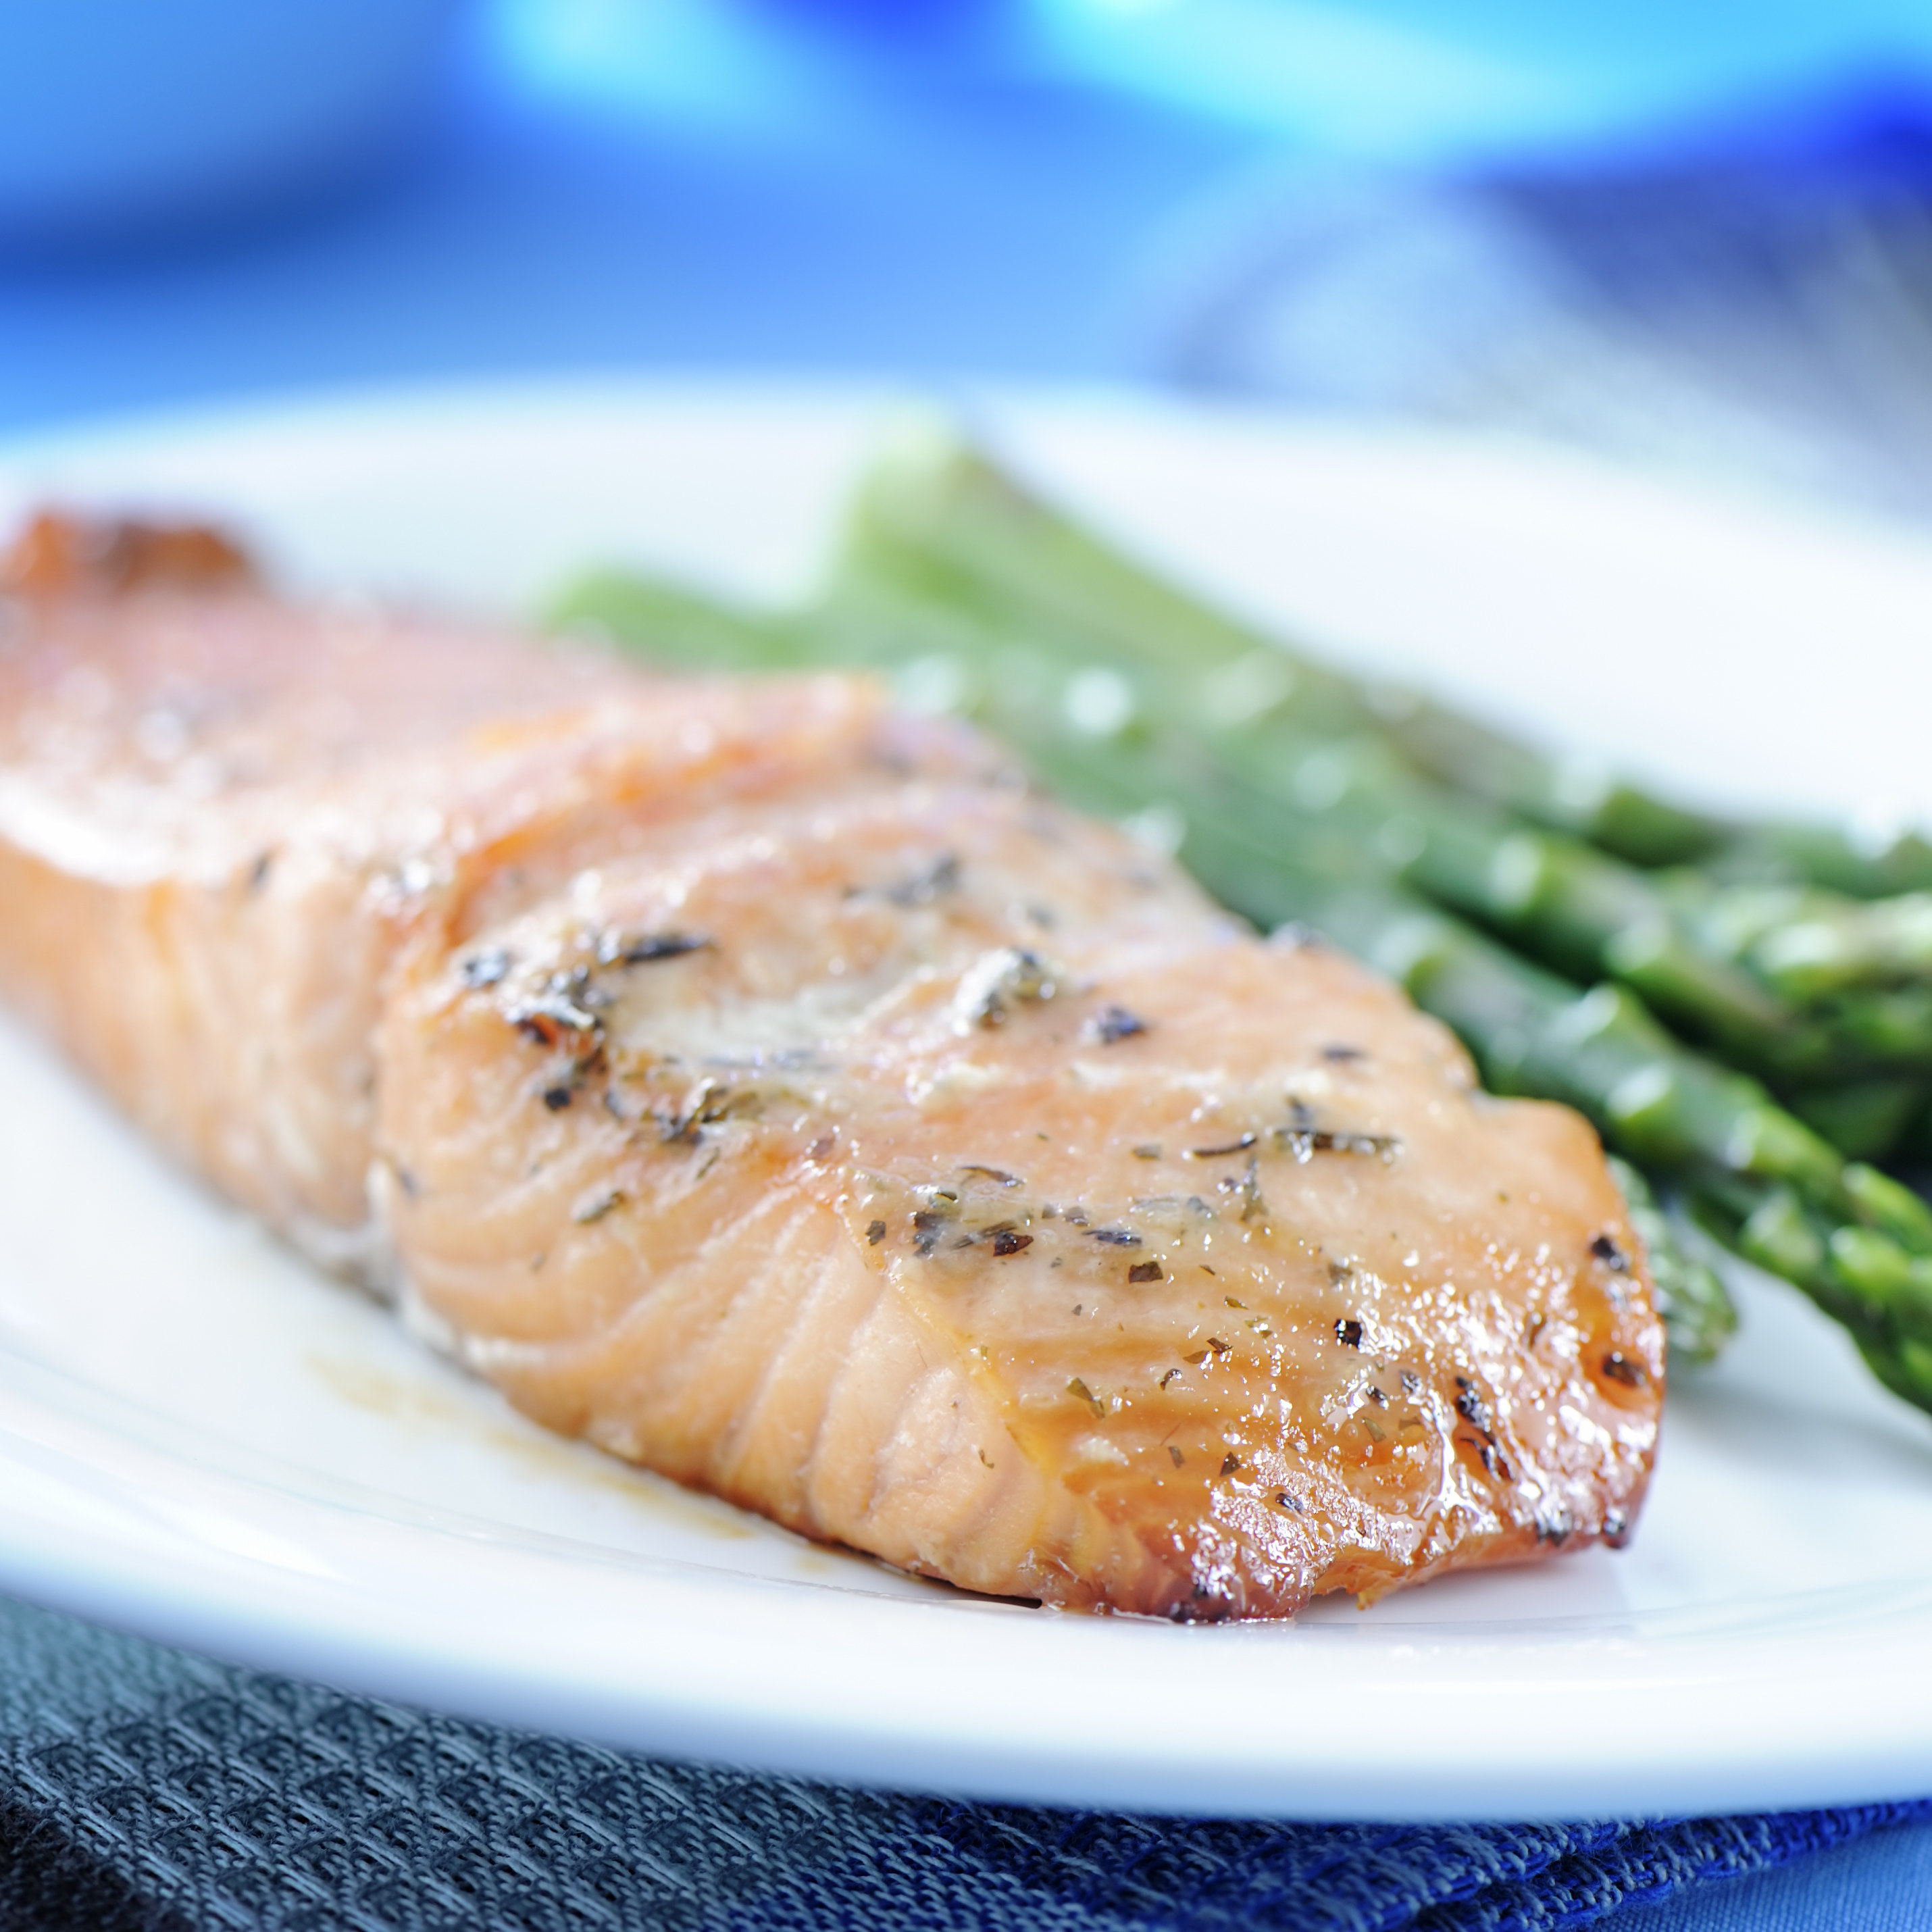 Baked salmon with asparagus in background.